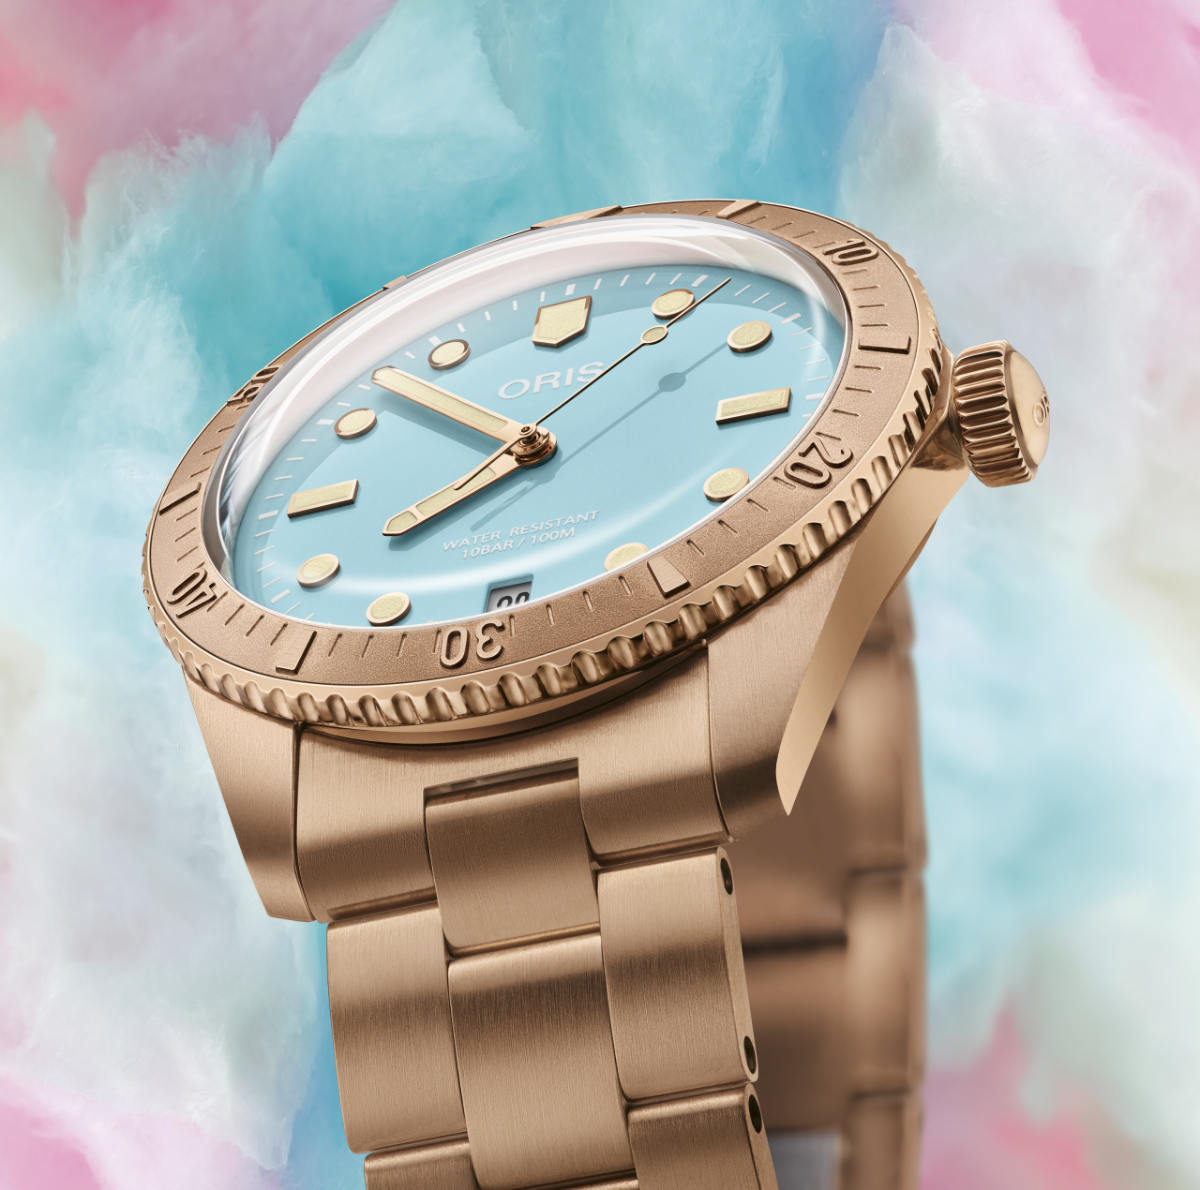 Oris Presents Its New Divers Sixty-Five Cotton Candy Watch